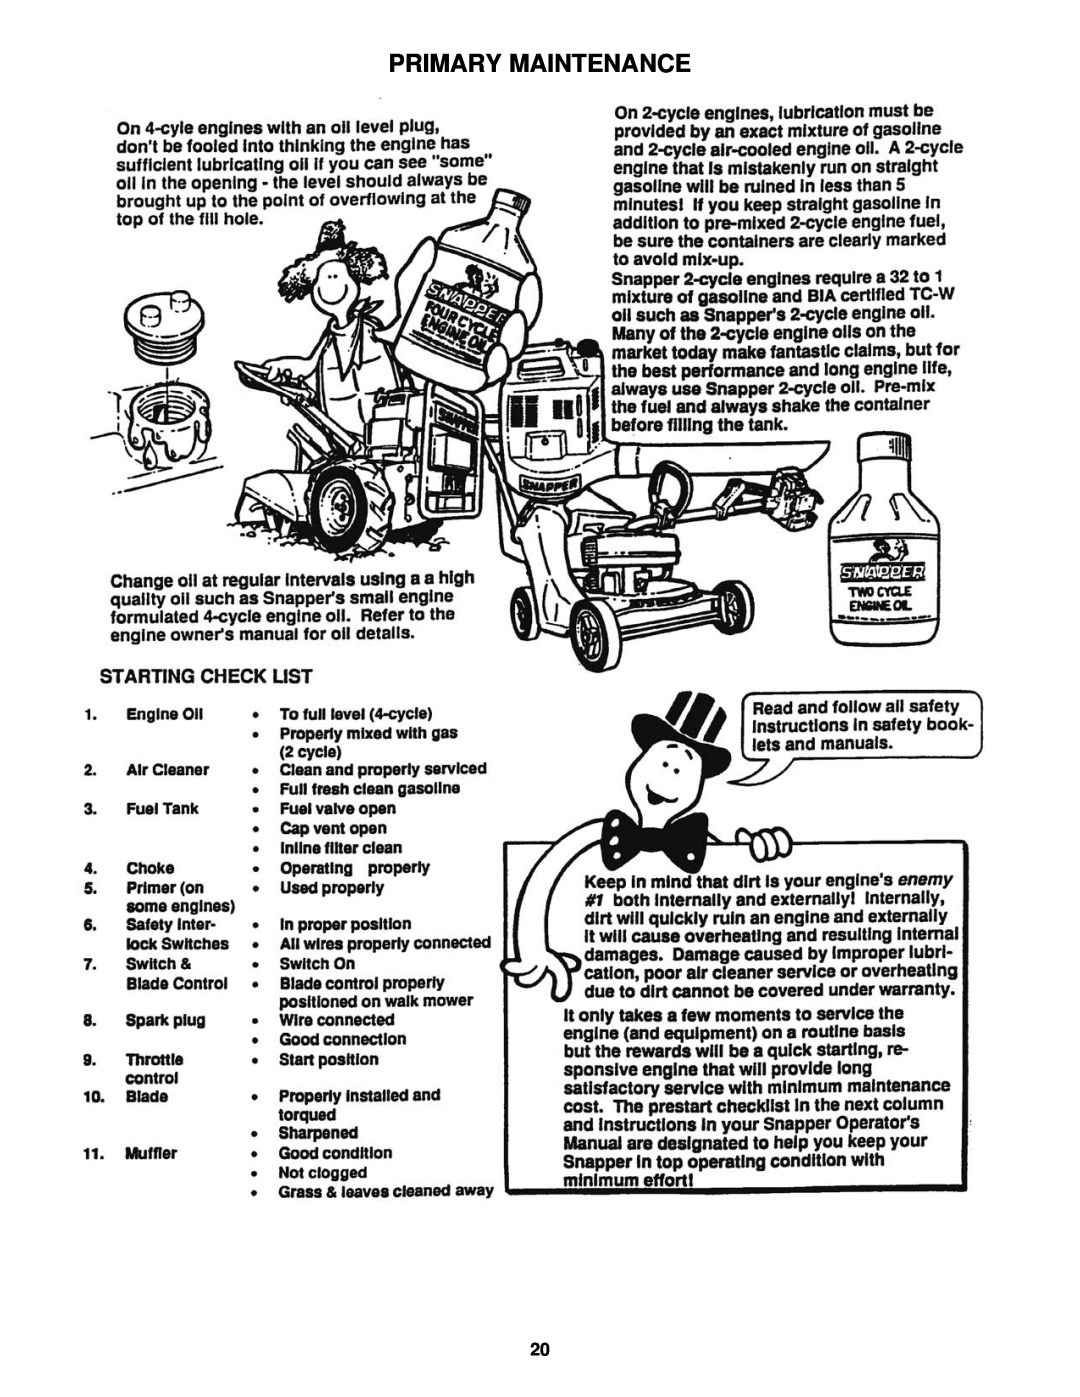 Snapper R1962519B important safety instructions Primary Maintenance 